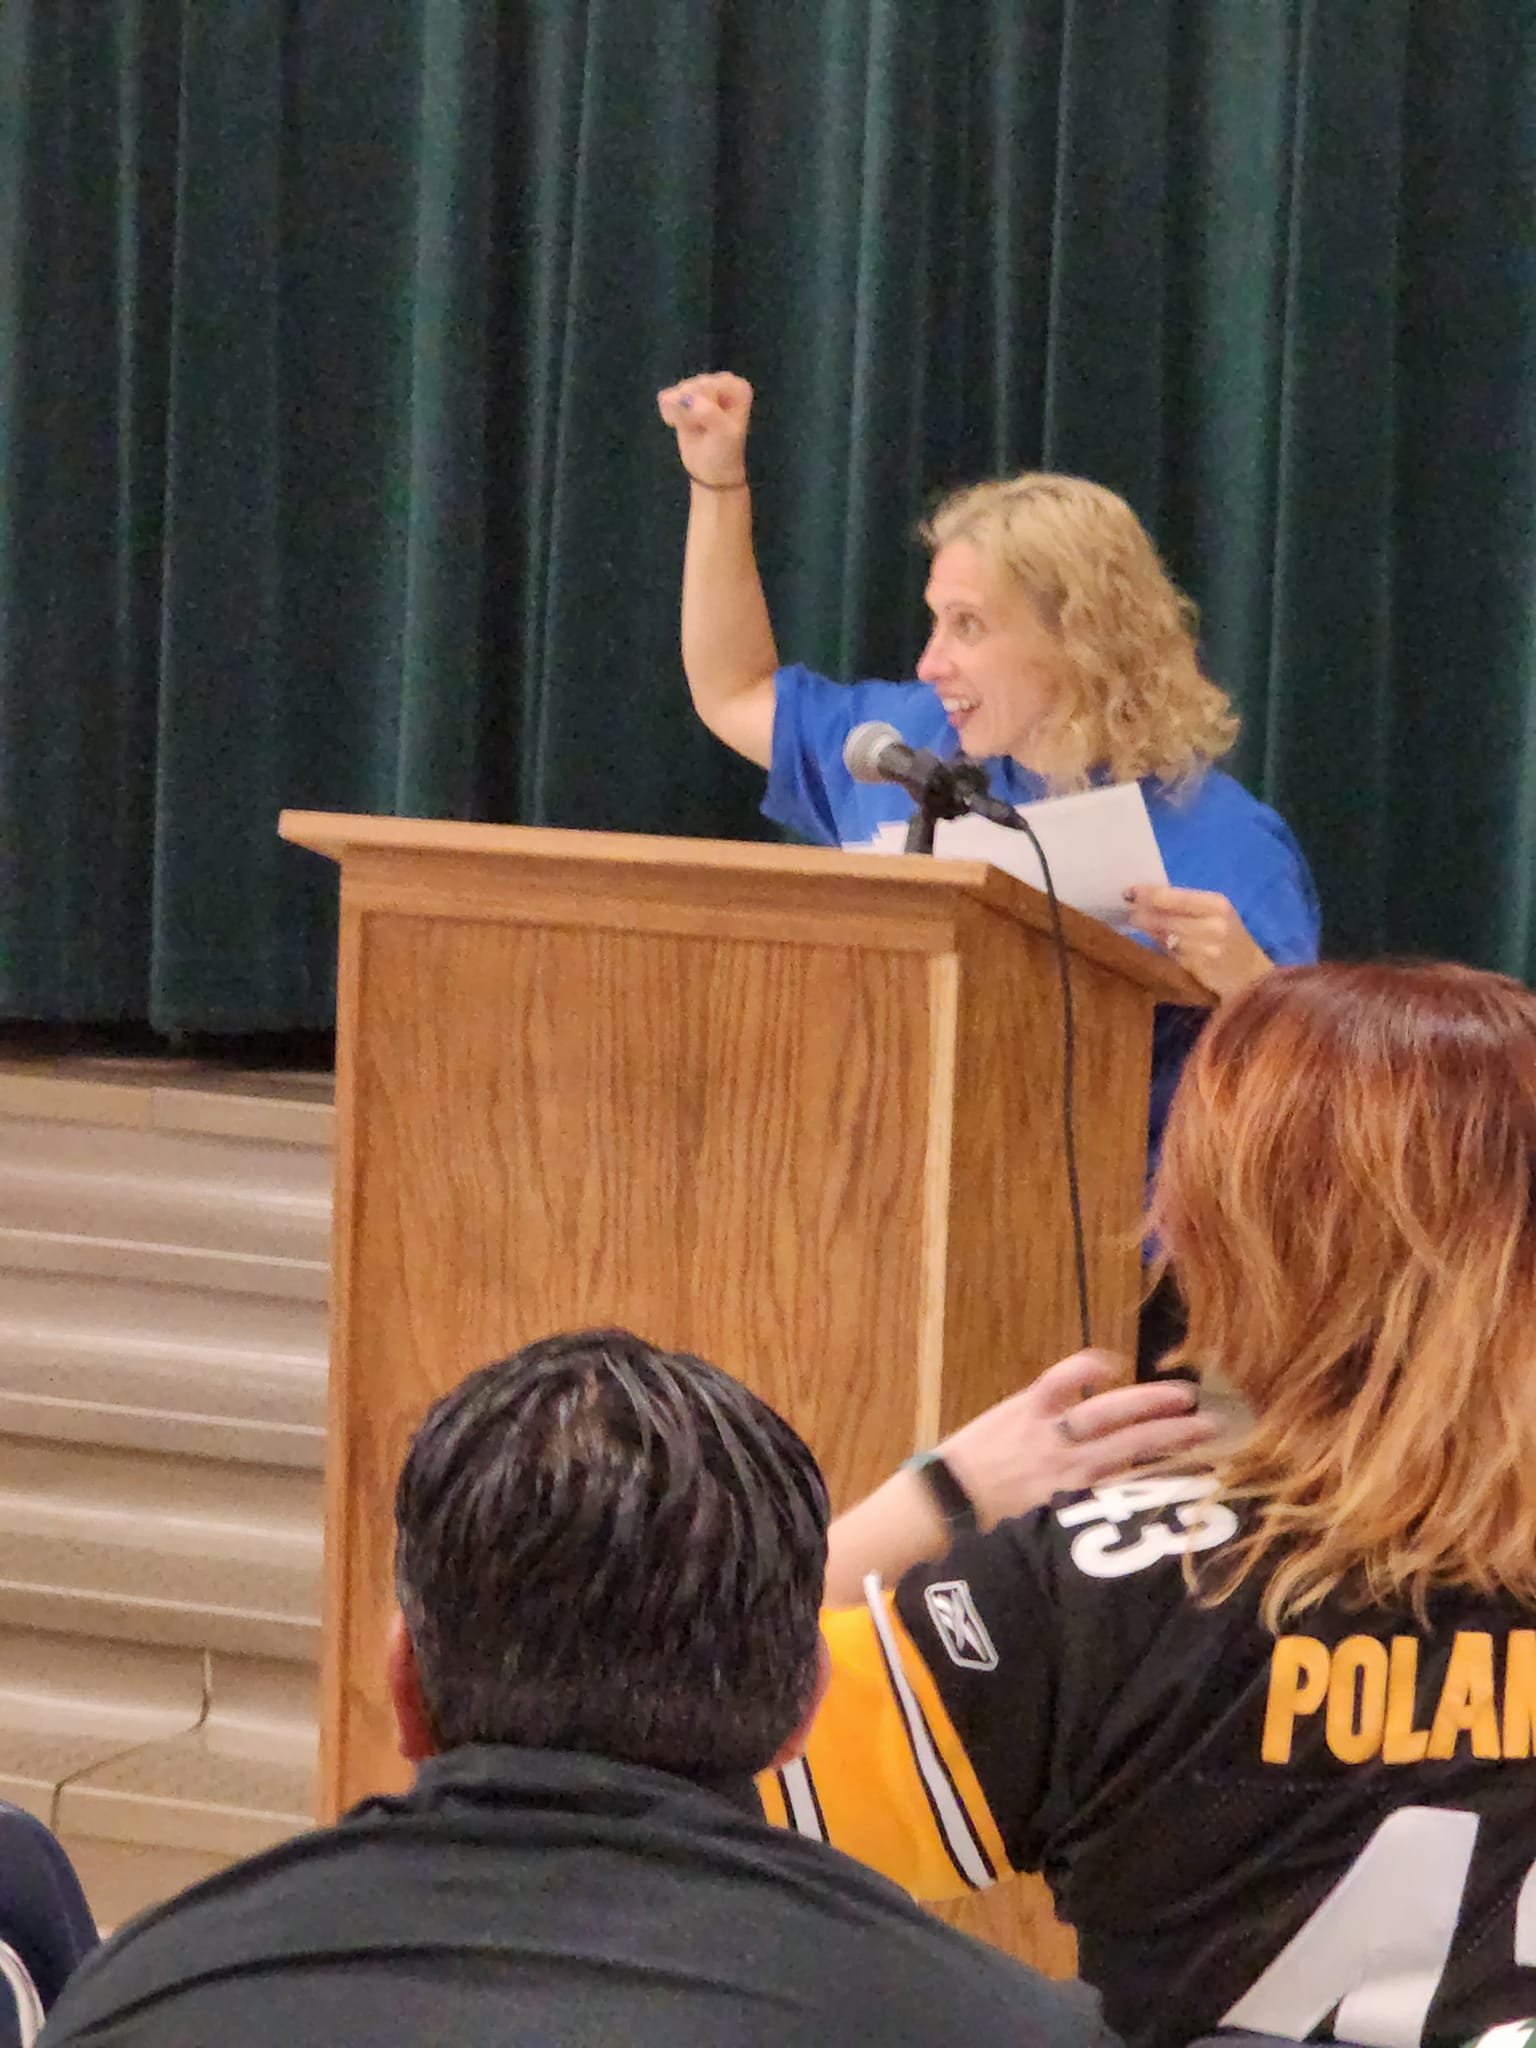 Blonde headed female standing at a podium speaking.